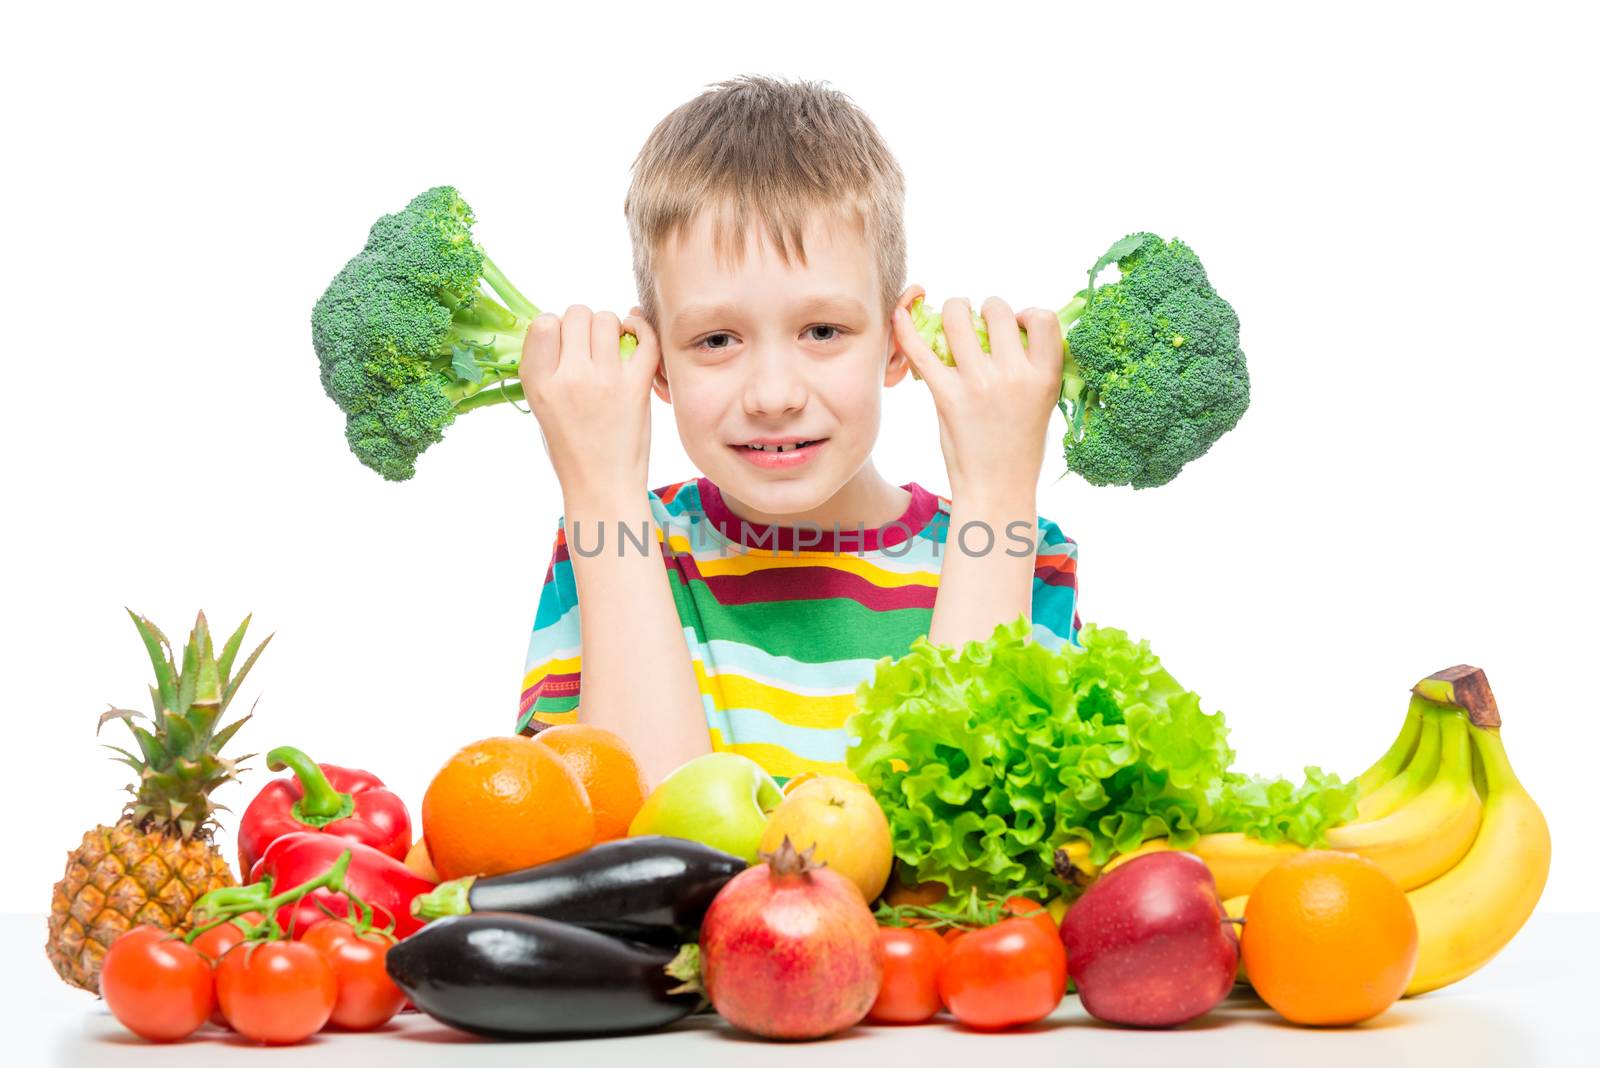 Boy 10 years old with broccoli and a bunch of vegetables and fruits posing in the studio isolated on white background